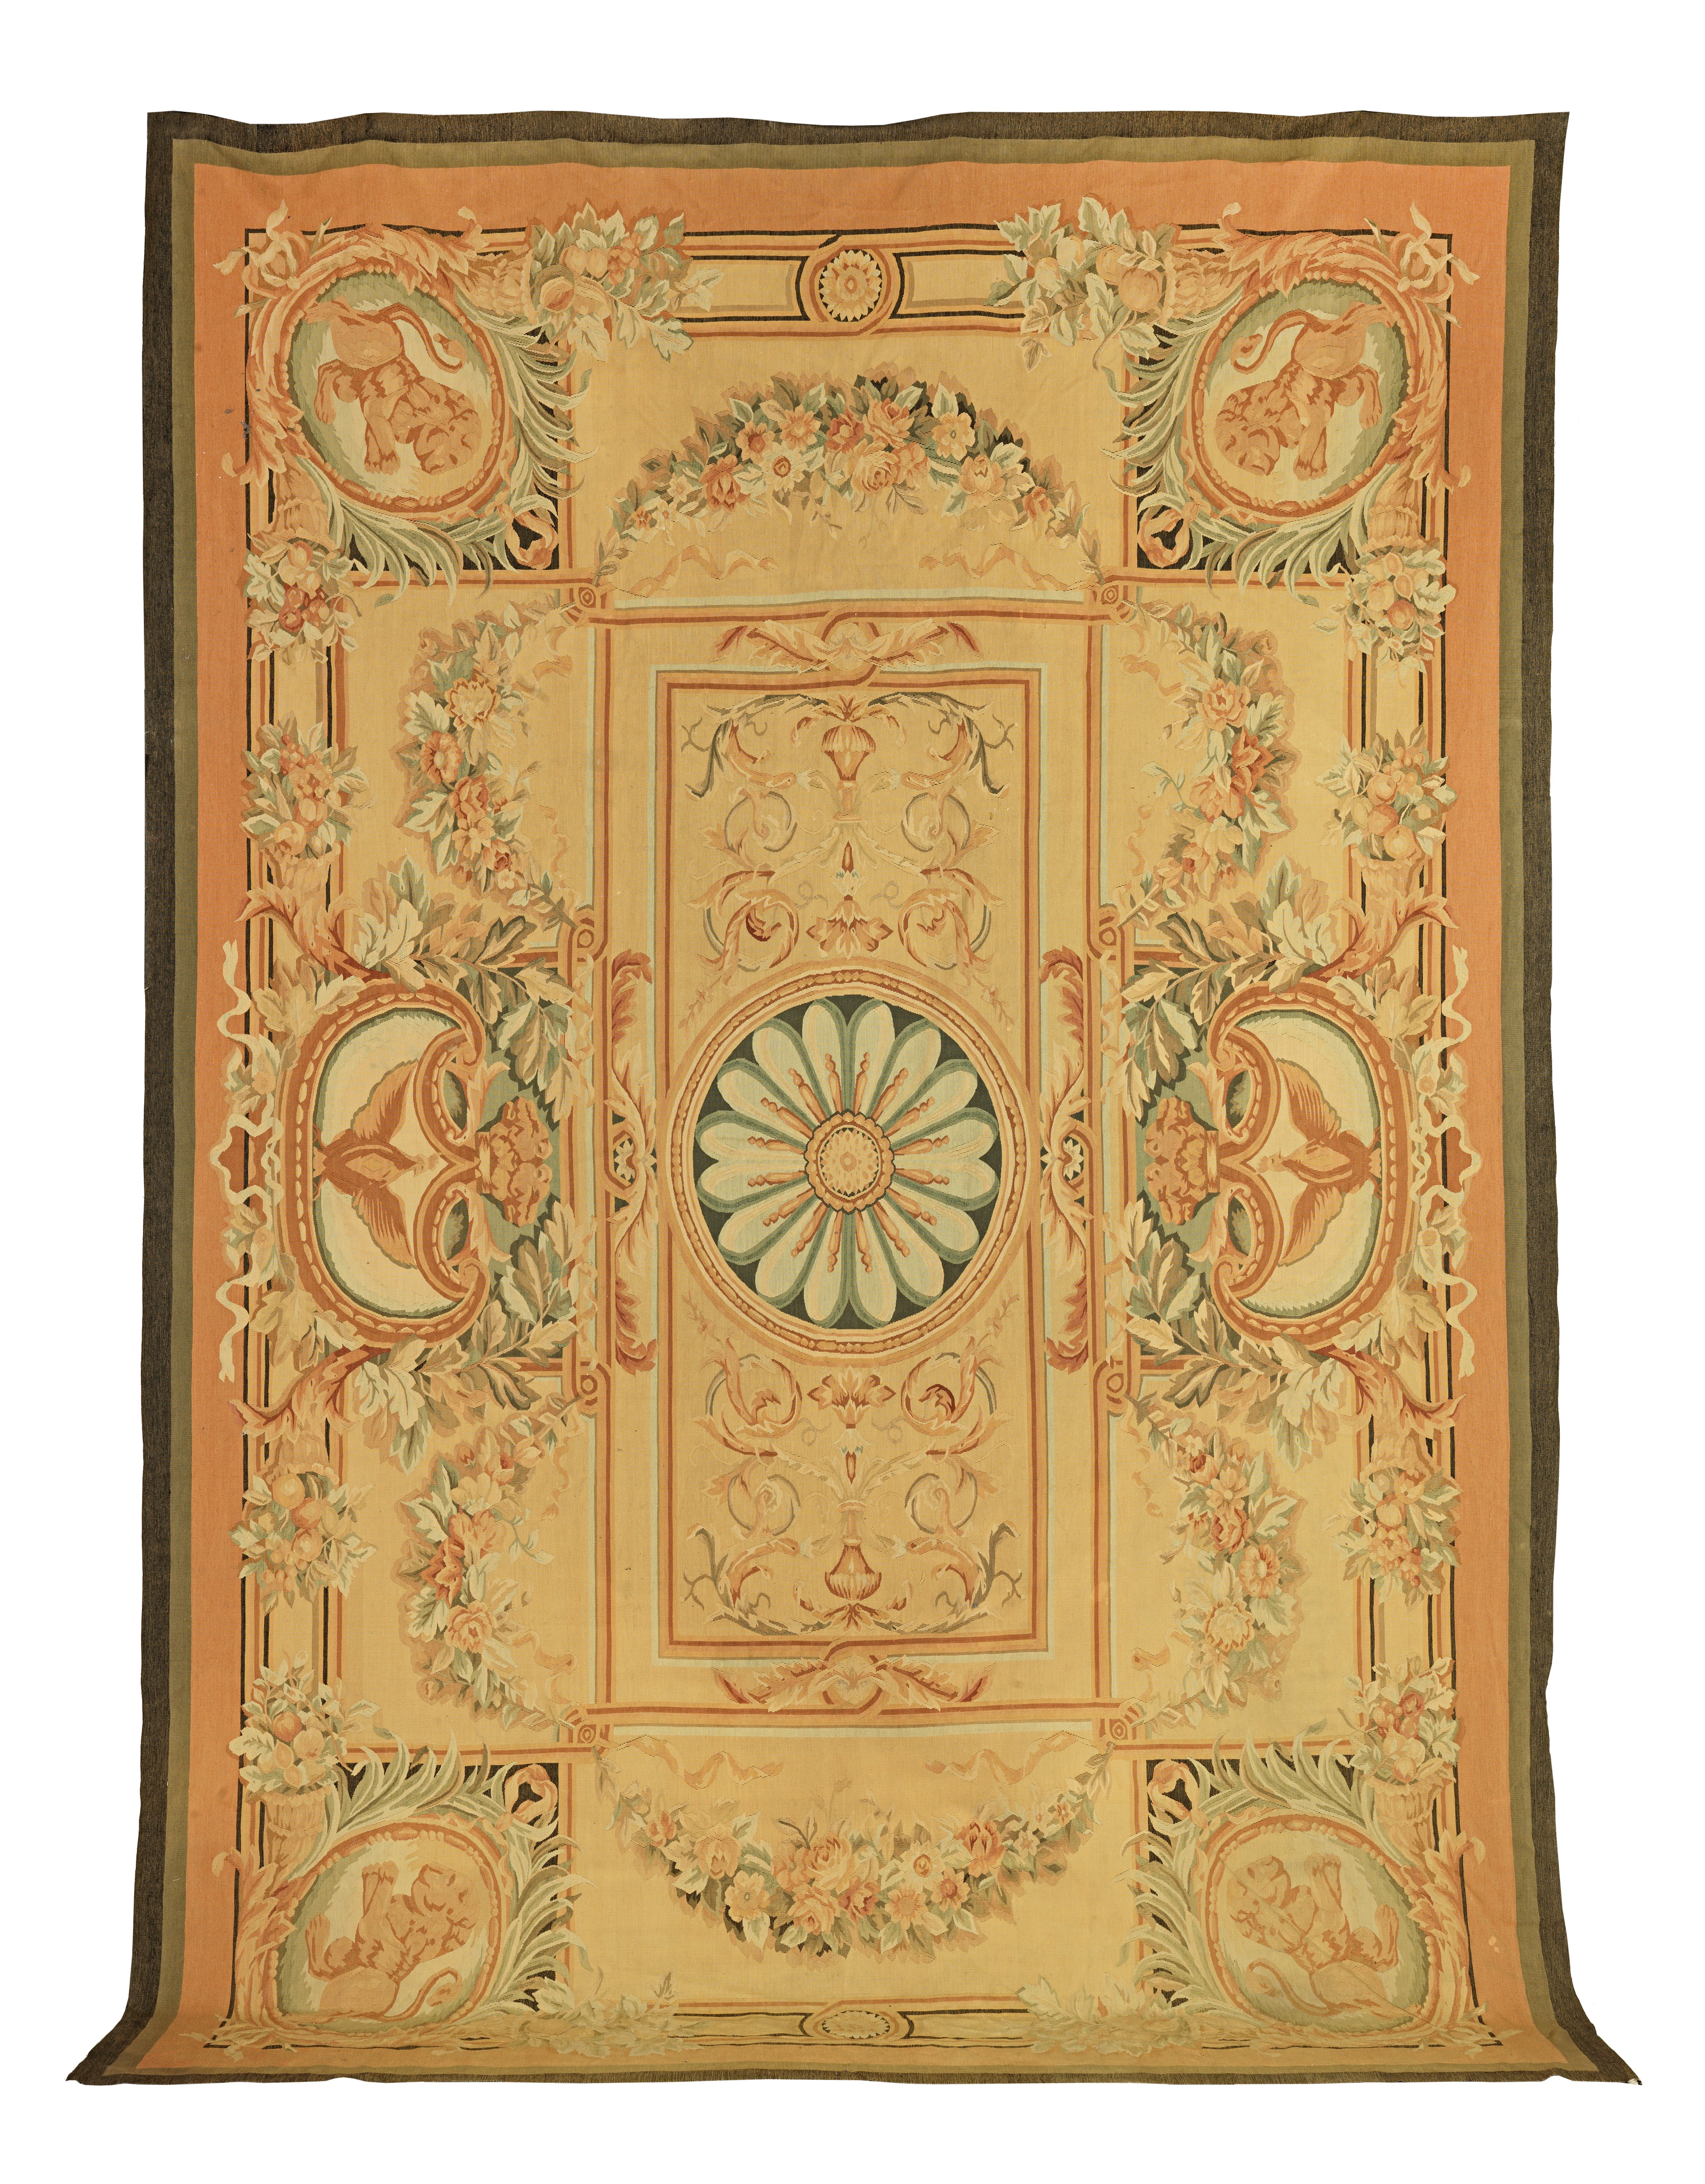 A charming Aubusson tapestry, early 19th century France, 435cm x 310